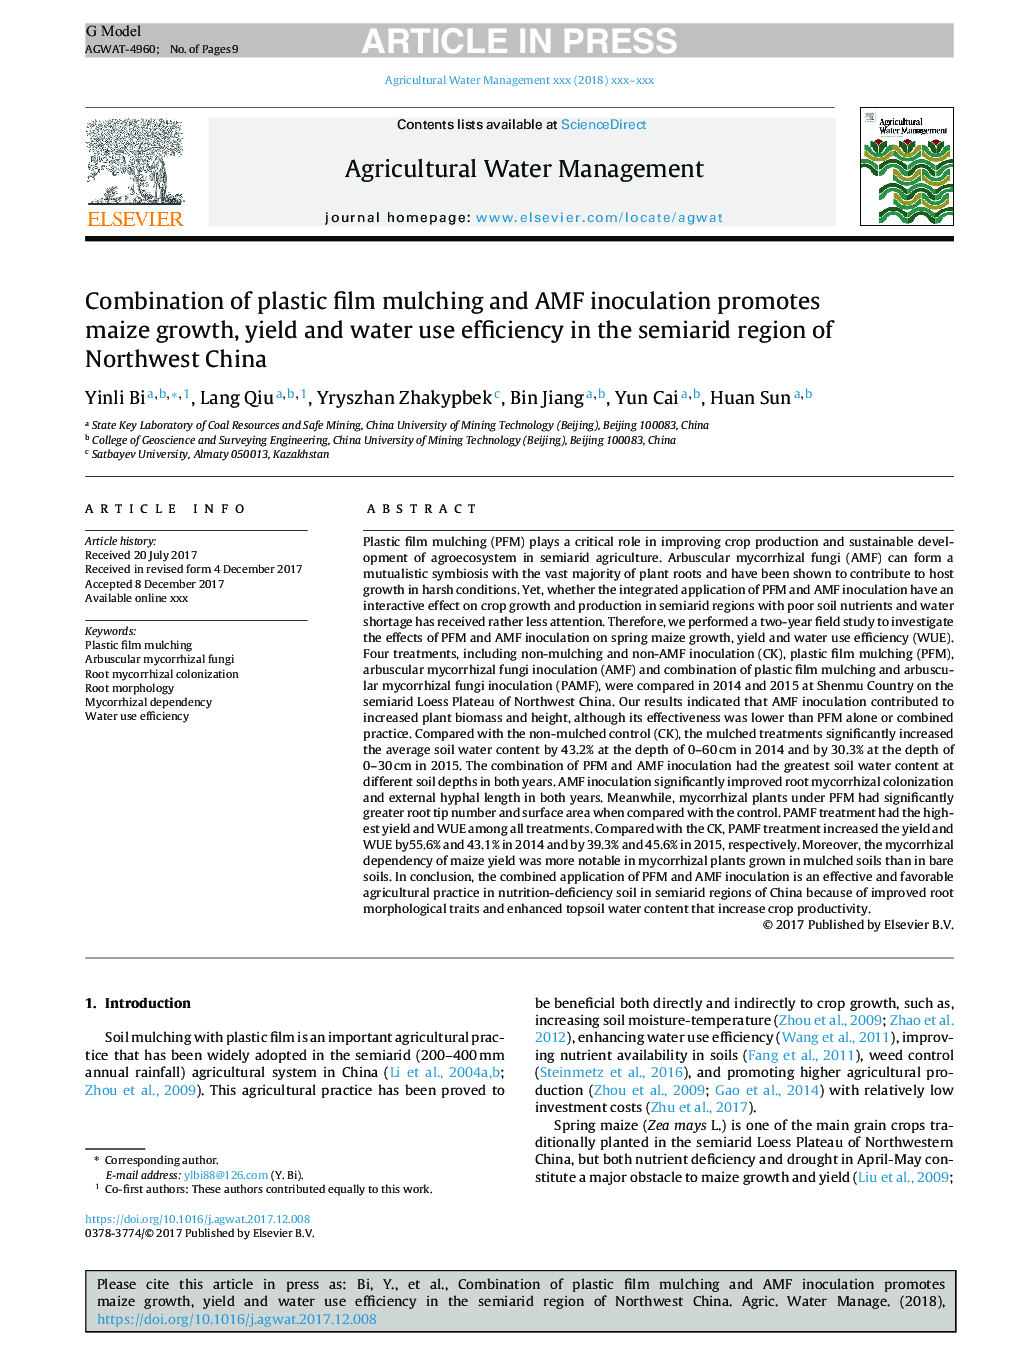 Combination of plastic film mulching and AMF inoculation promotes maize growth, yield and water use efficiency in the semiarid region of Northwest China